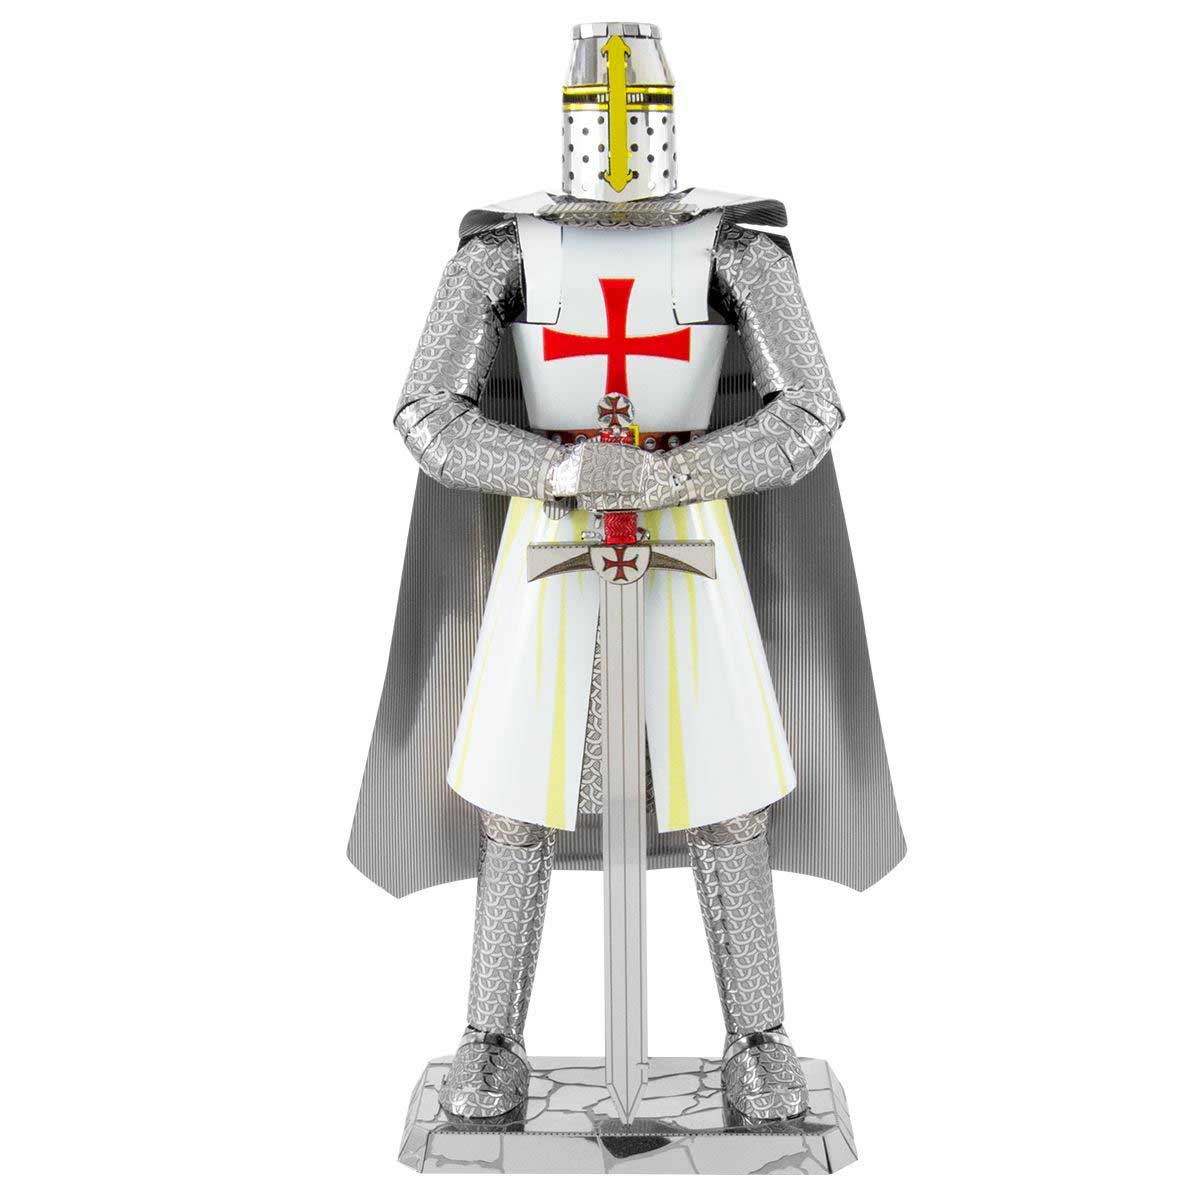 Templar Knight Military 3D Puzzle